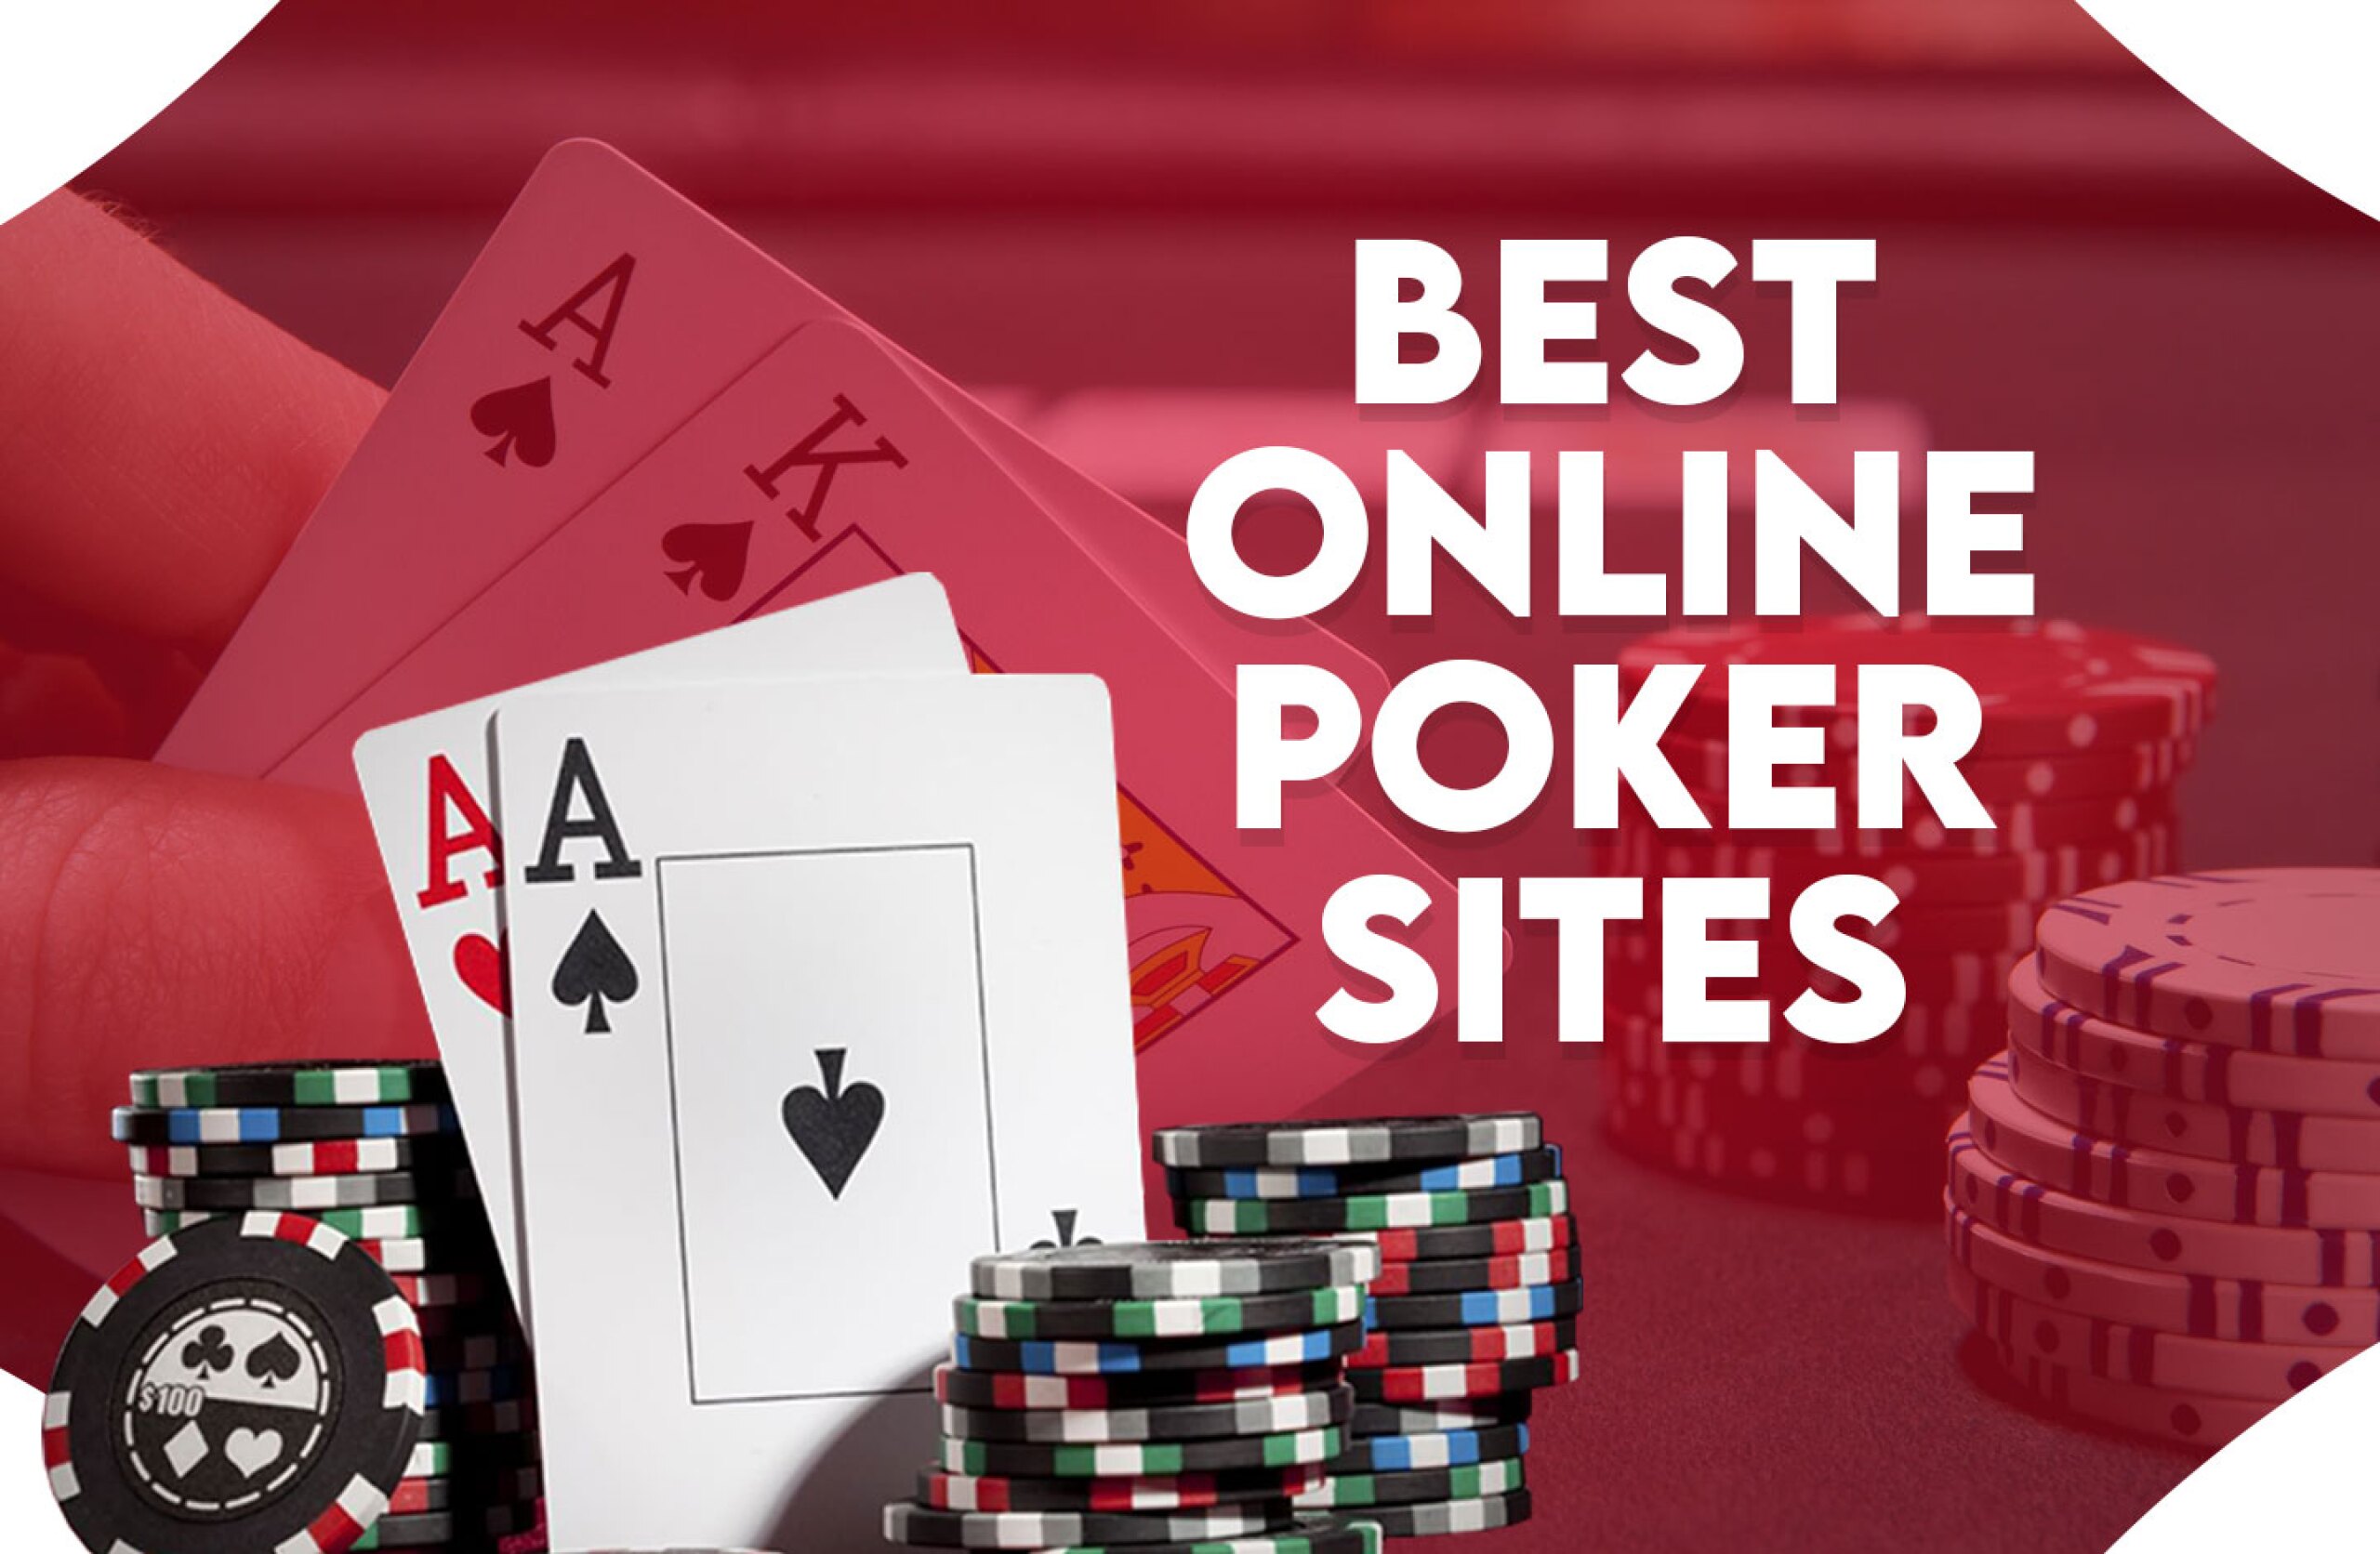 Best Online Poker Sites to Play Real Money Poker Games: Ranked for Traffic, Table Softness, and Mobile Play